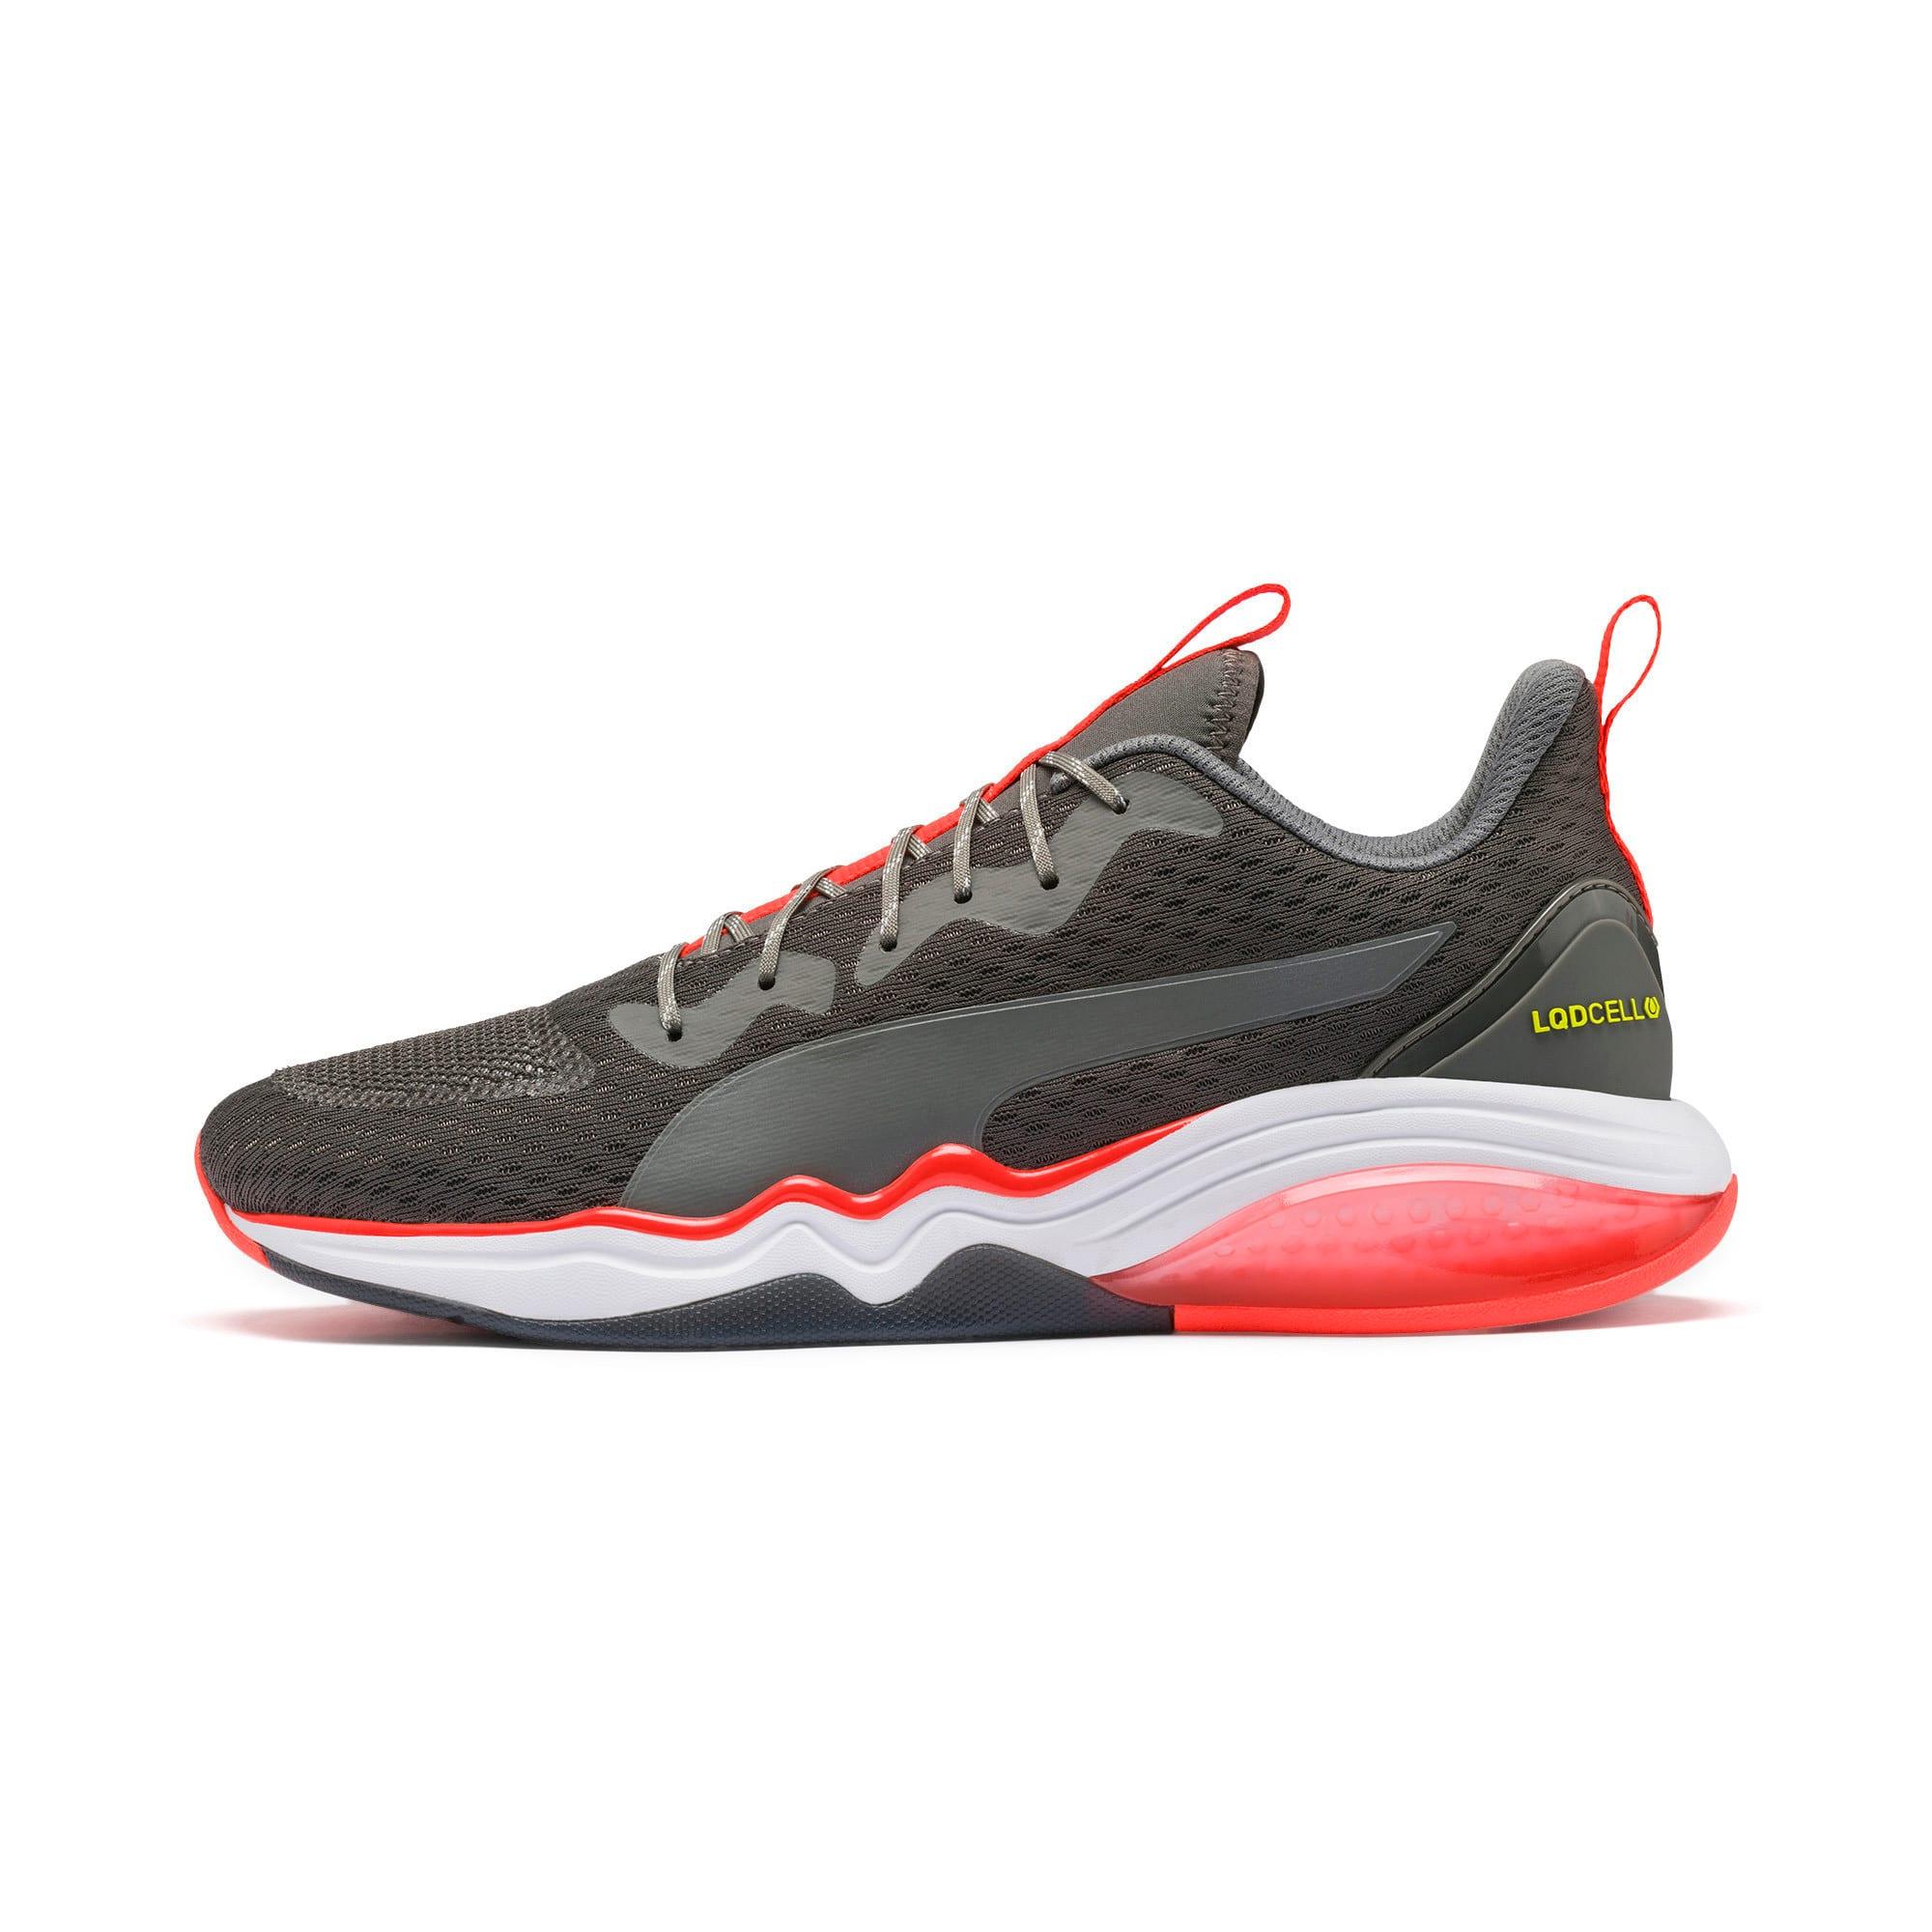 PUMA Rubber Lqdcell Tension Men's Training Shoes in Red for Men - Lyst